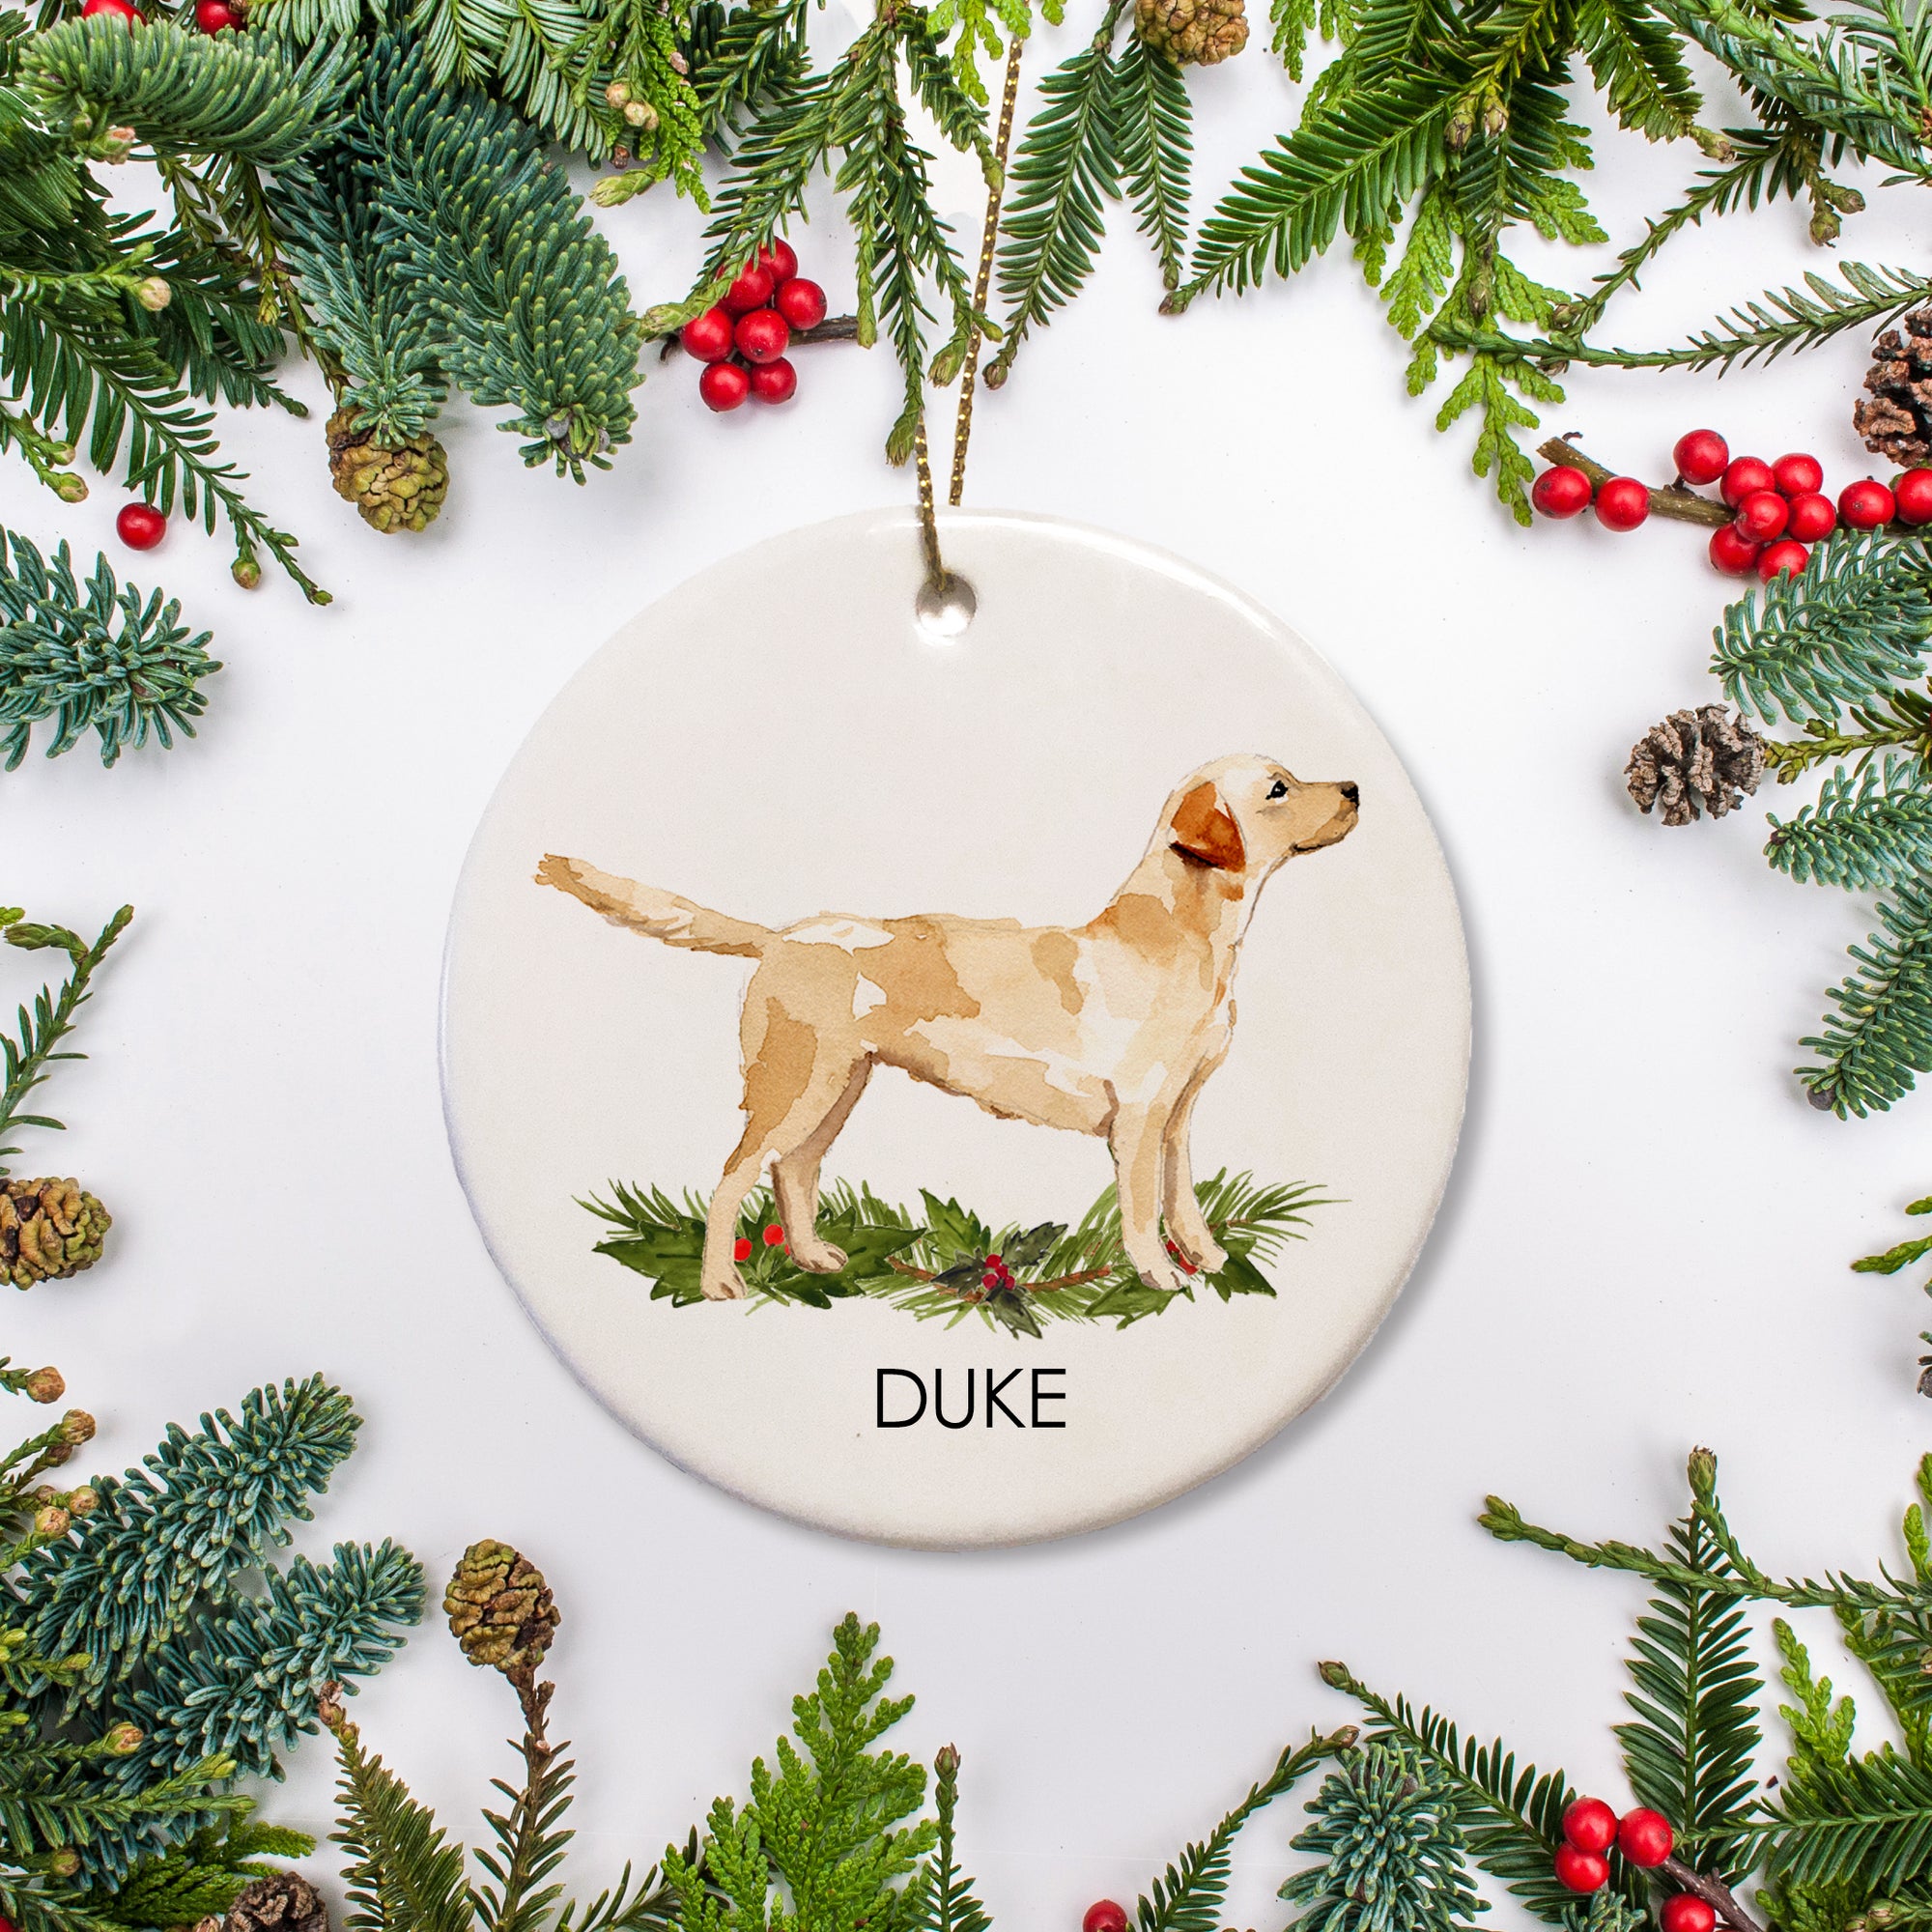 Yellow Labrador Christmas Ornament, Personalized with your dog's name and the year, Printed on glossy ceramic, and comes with a free gift box